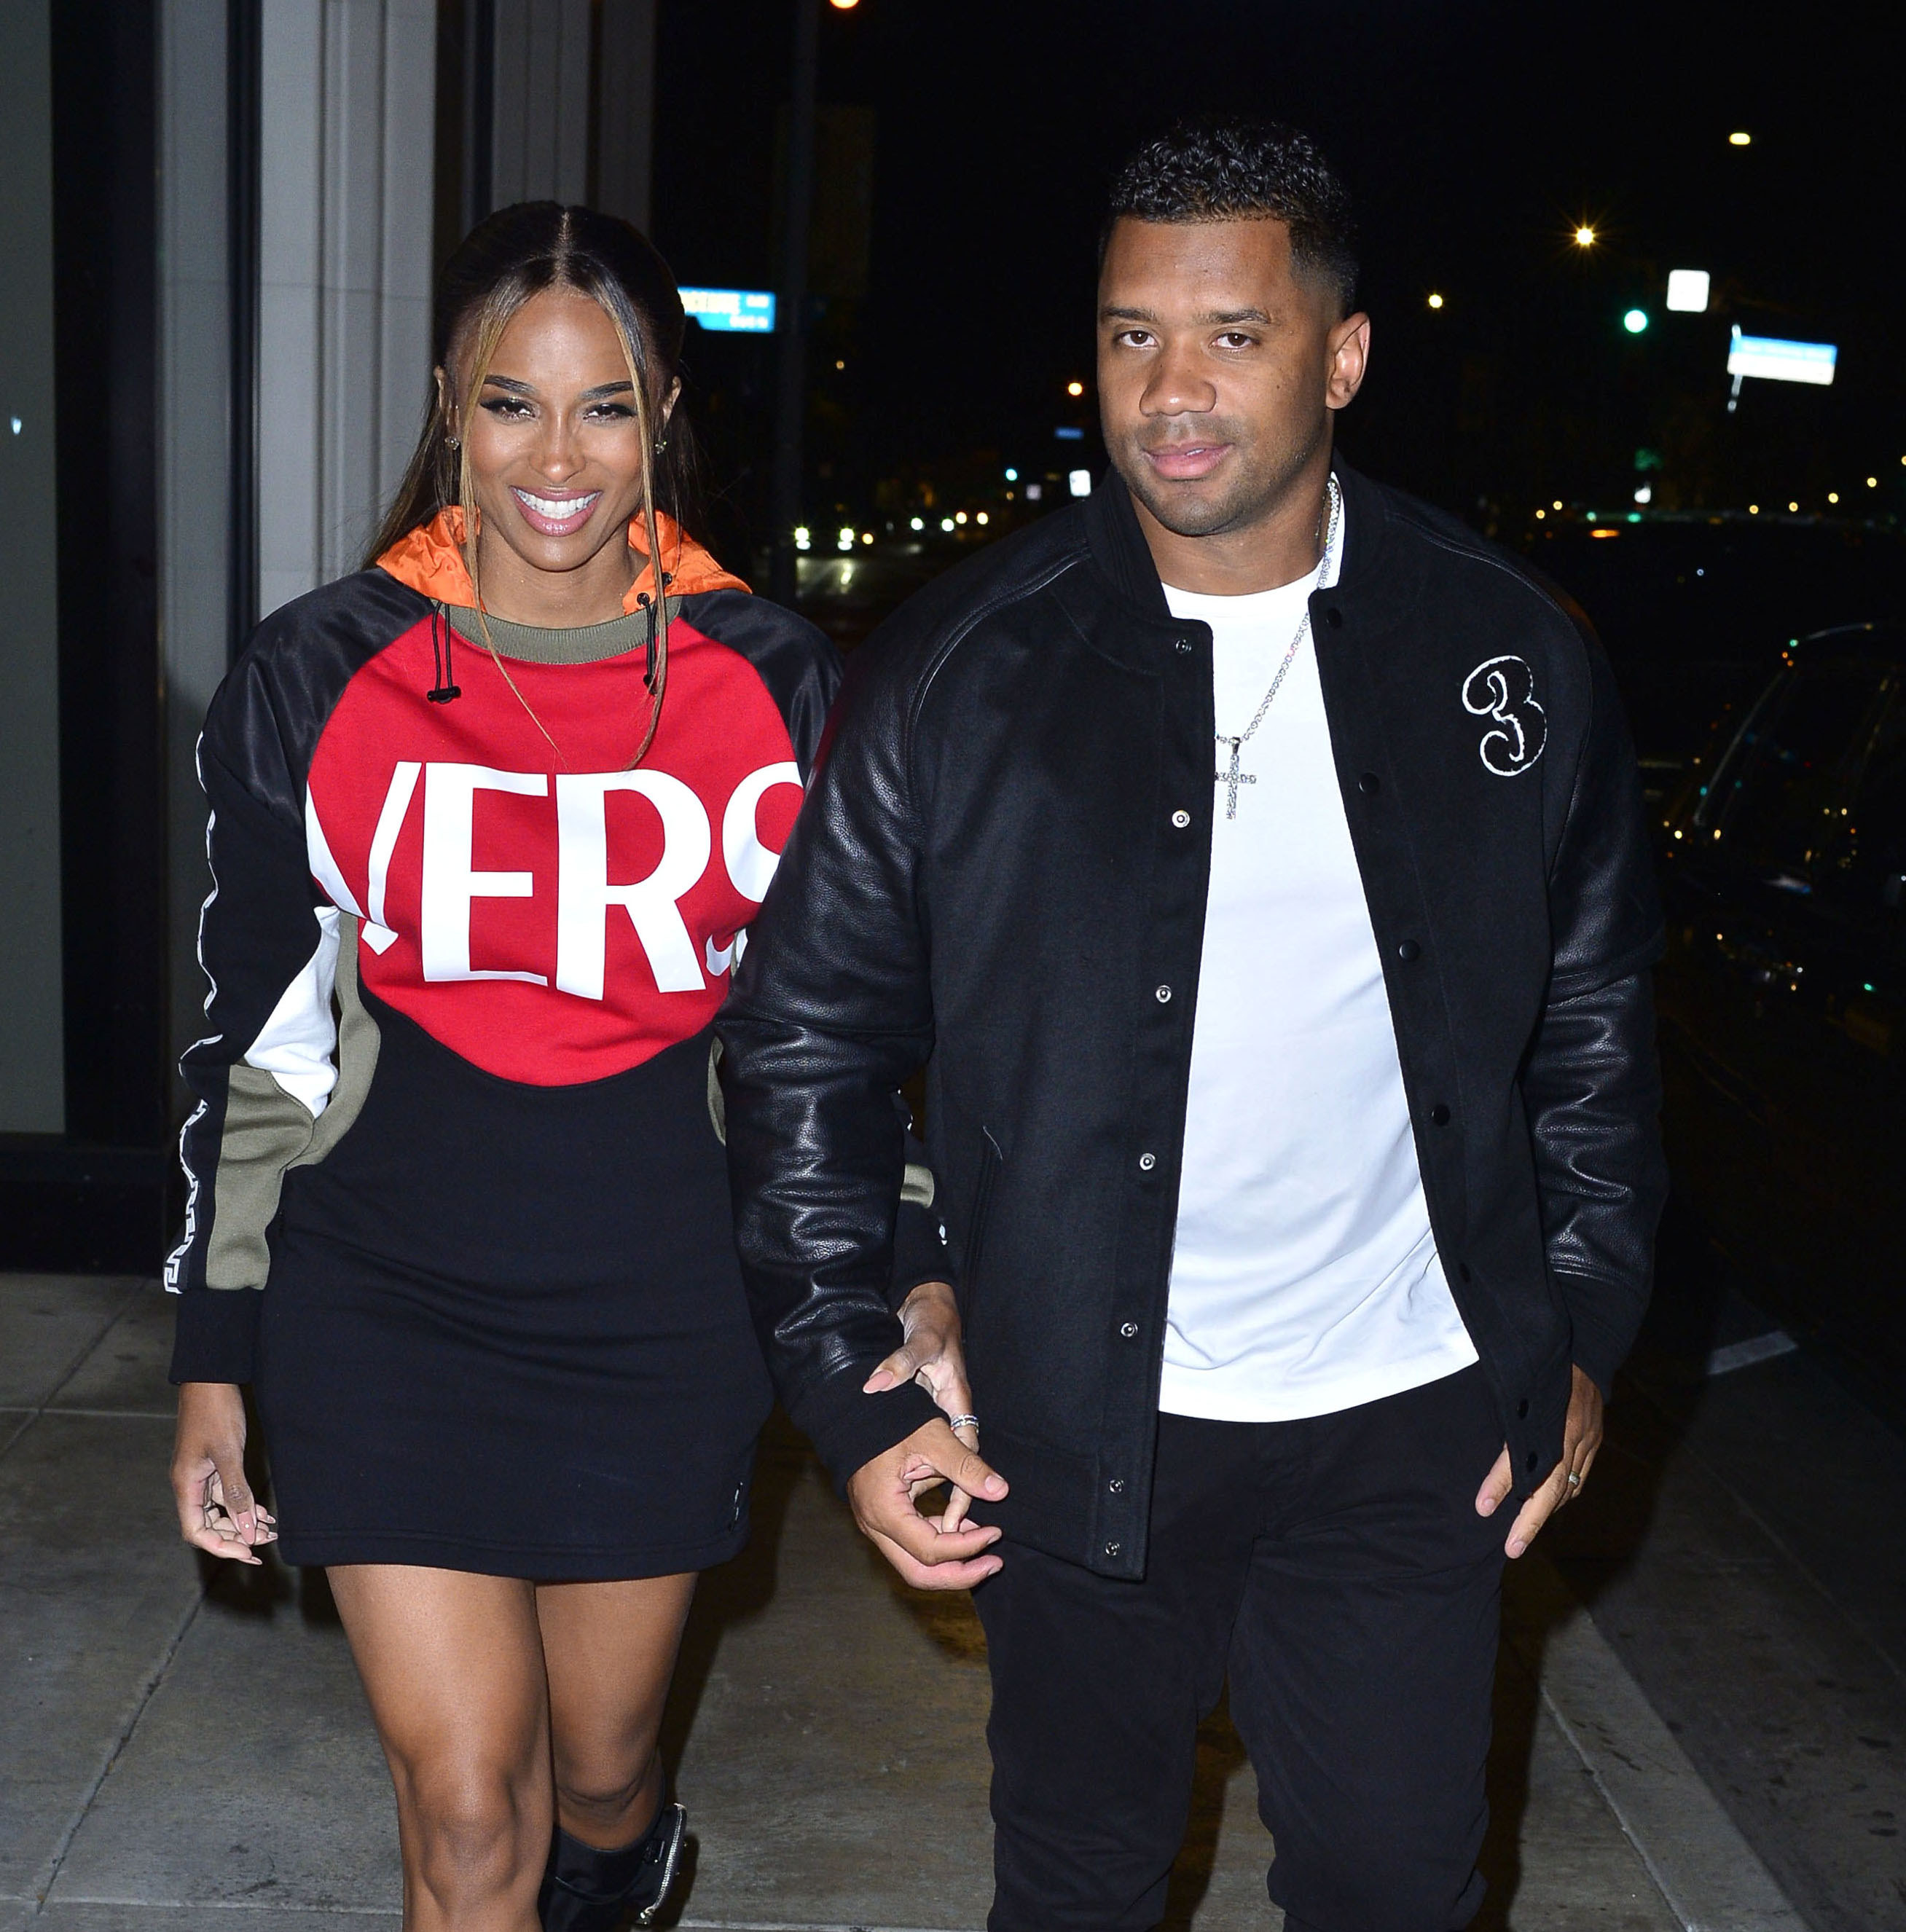 Russell and Ciara walk down the street together